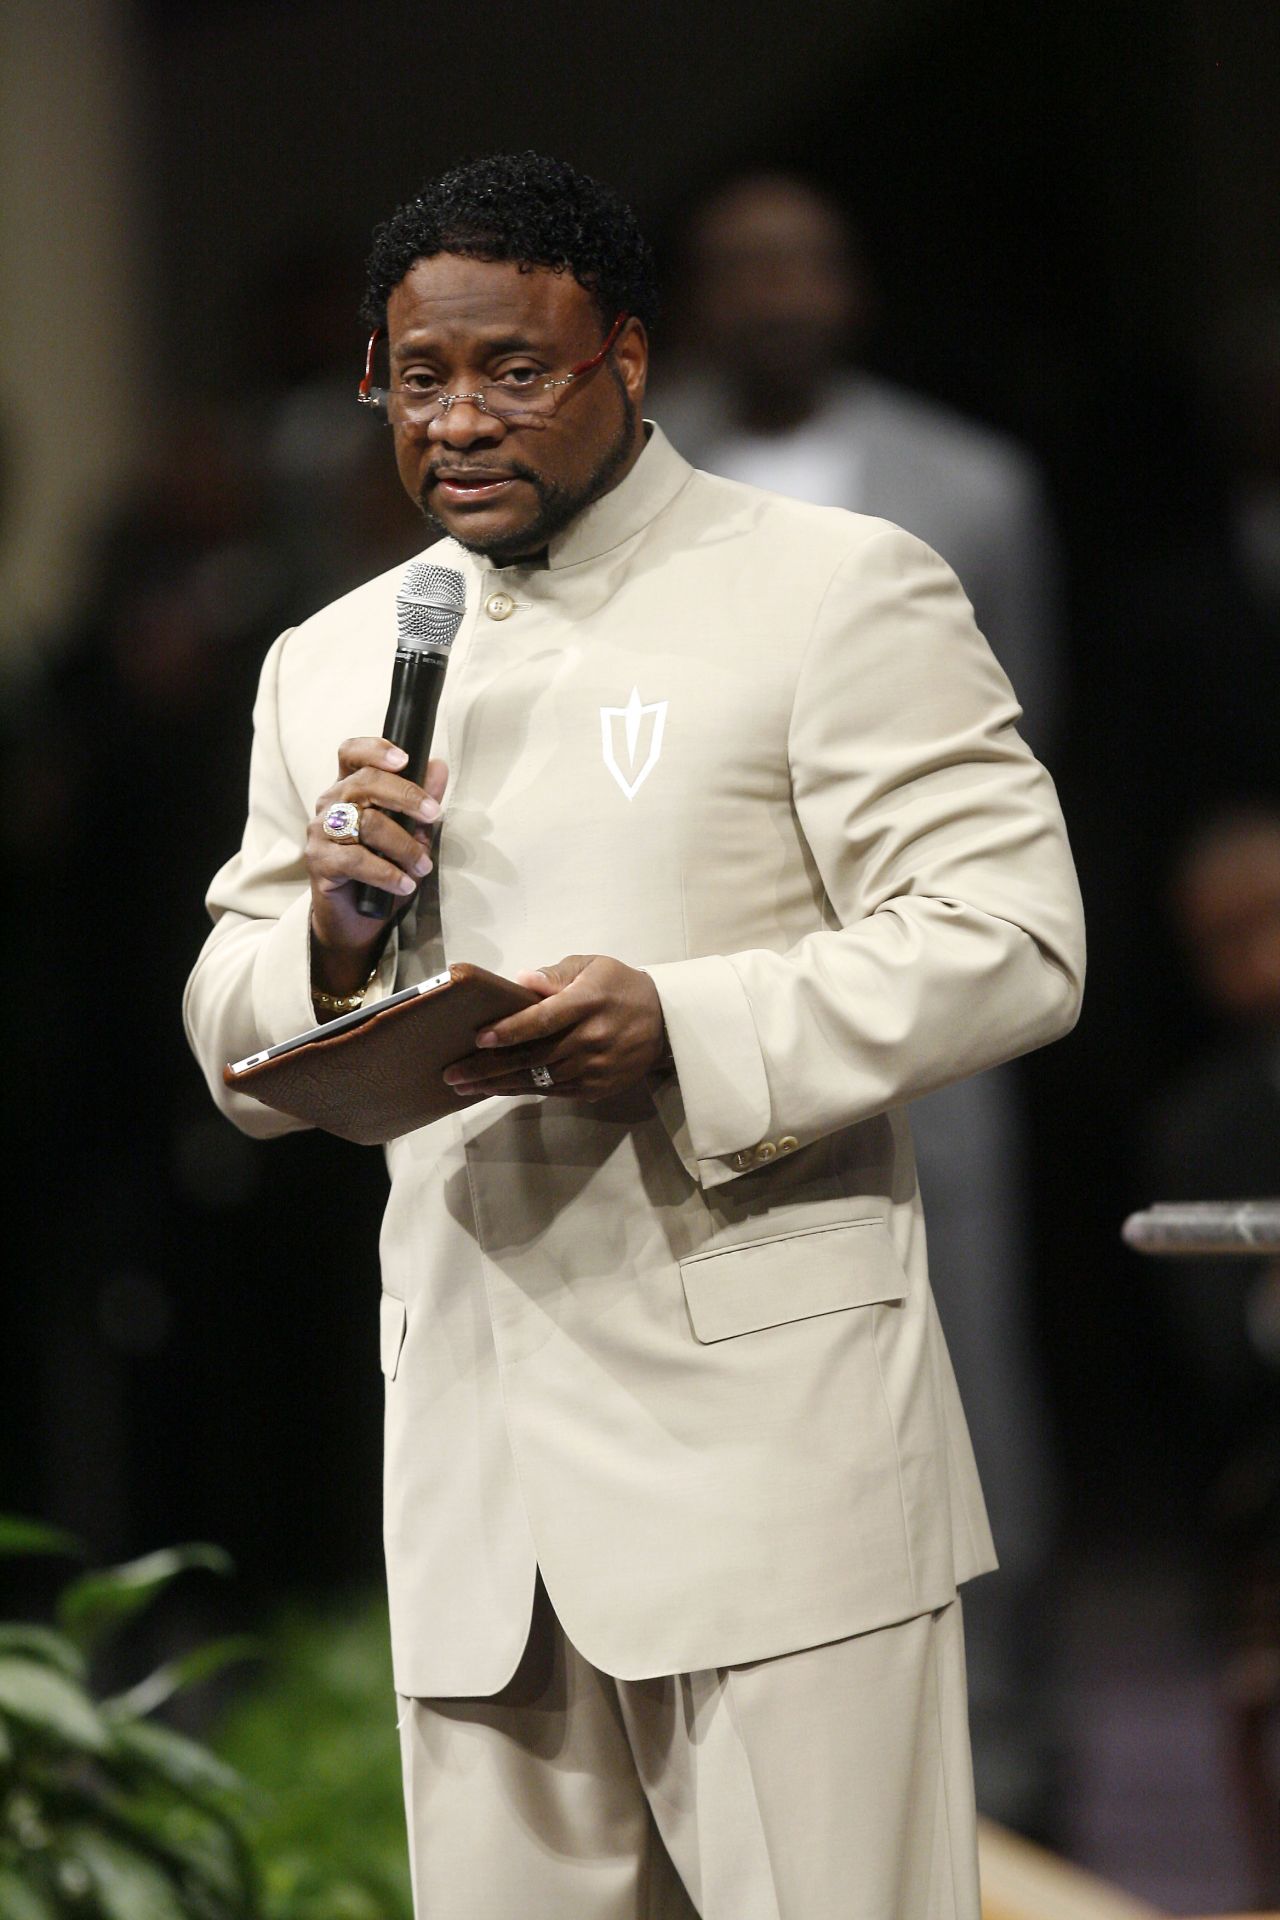 In a 2010 lawsuit, four former congregants of Bishop Eddie Long's Atlanta-area megachurch accused the pastor of using his position and expensive gifts, such as cars and international trips, to coerce them into sexual acts while they were teens. Long, pictured in 2010, denied the allegations and <a href="http://religion.blogs.cnn.com/2011/05/26/bishop-eddie-long-settles-with-accusers/">settled with the young men in 2011</a>.